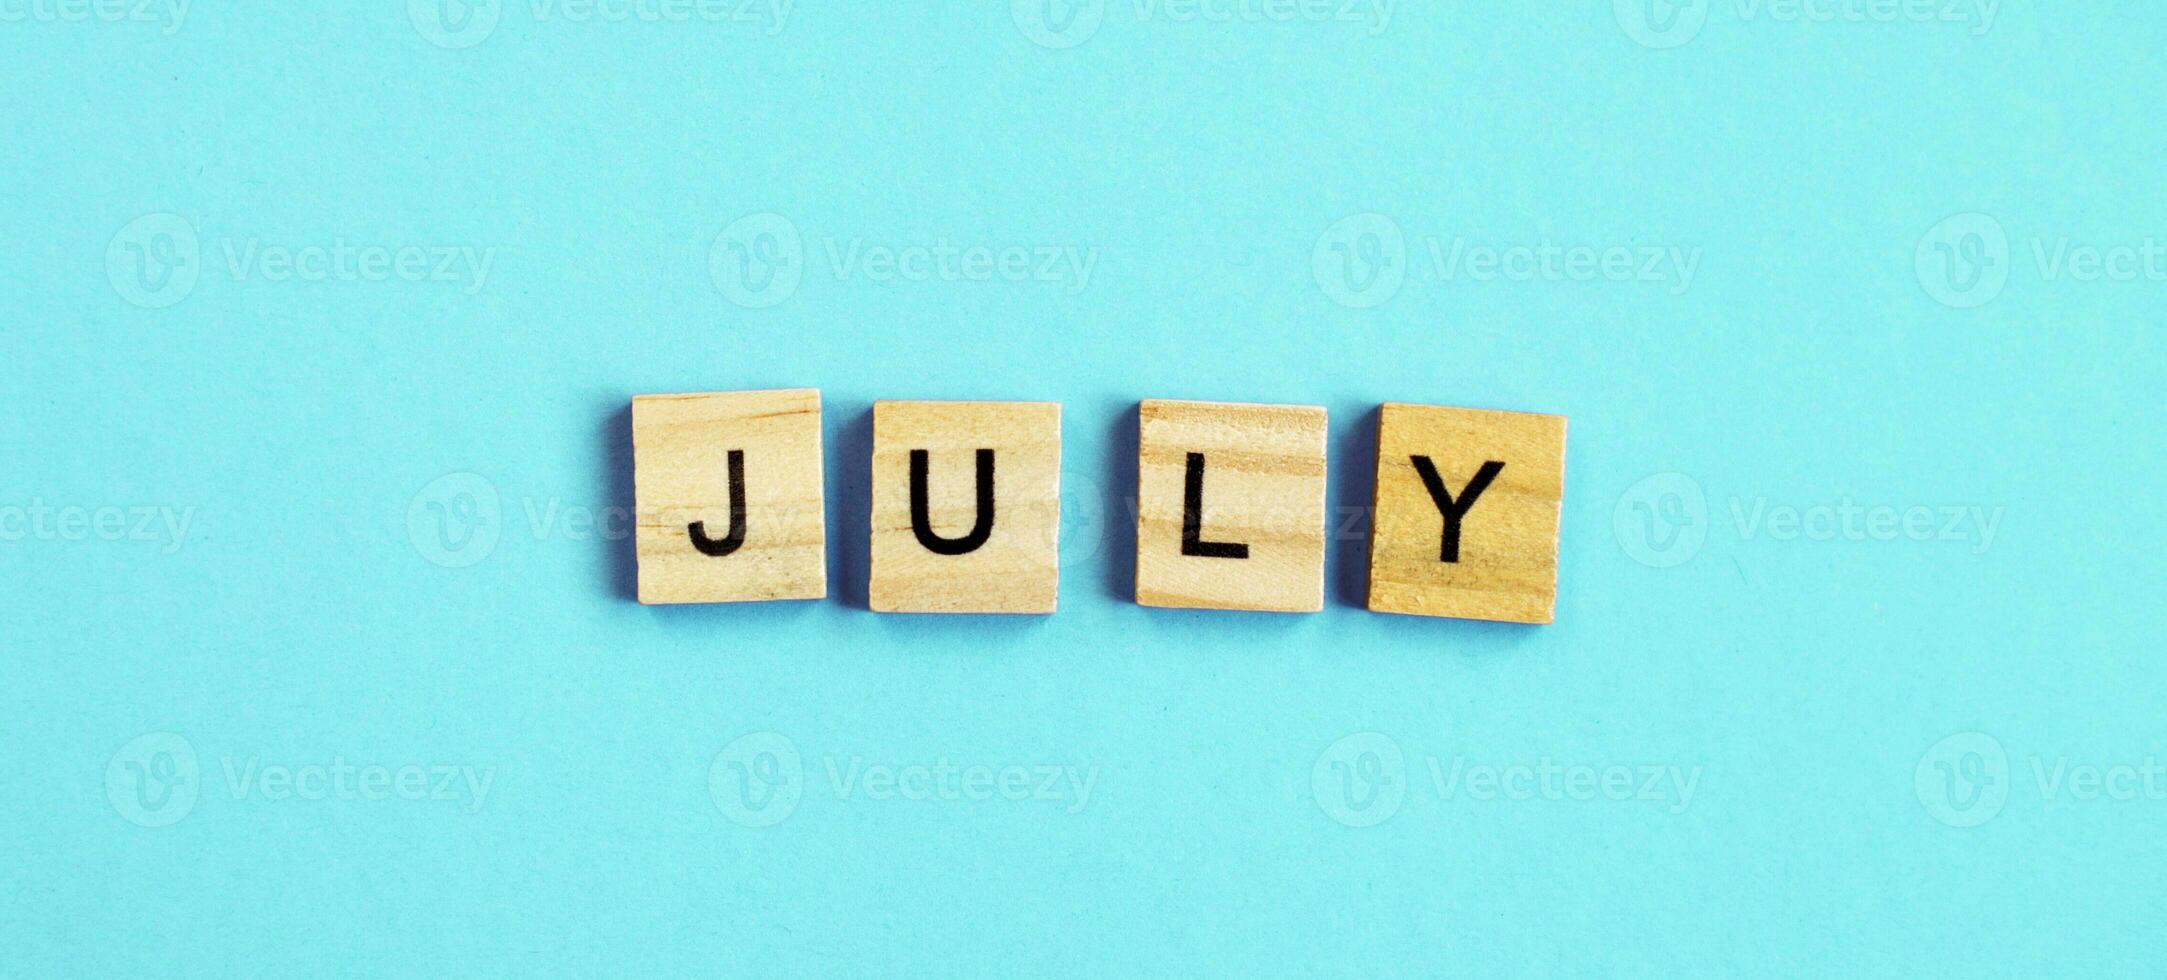 July word made by wooden cubes on a blue turquoise background photo